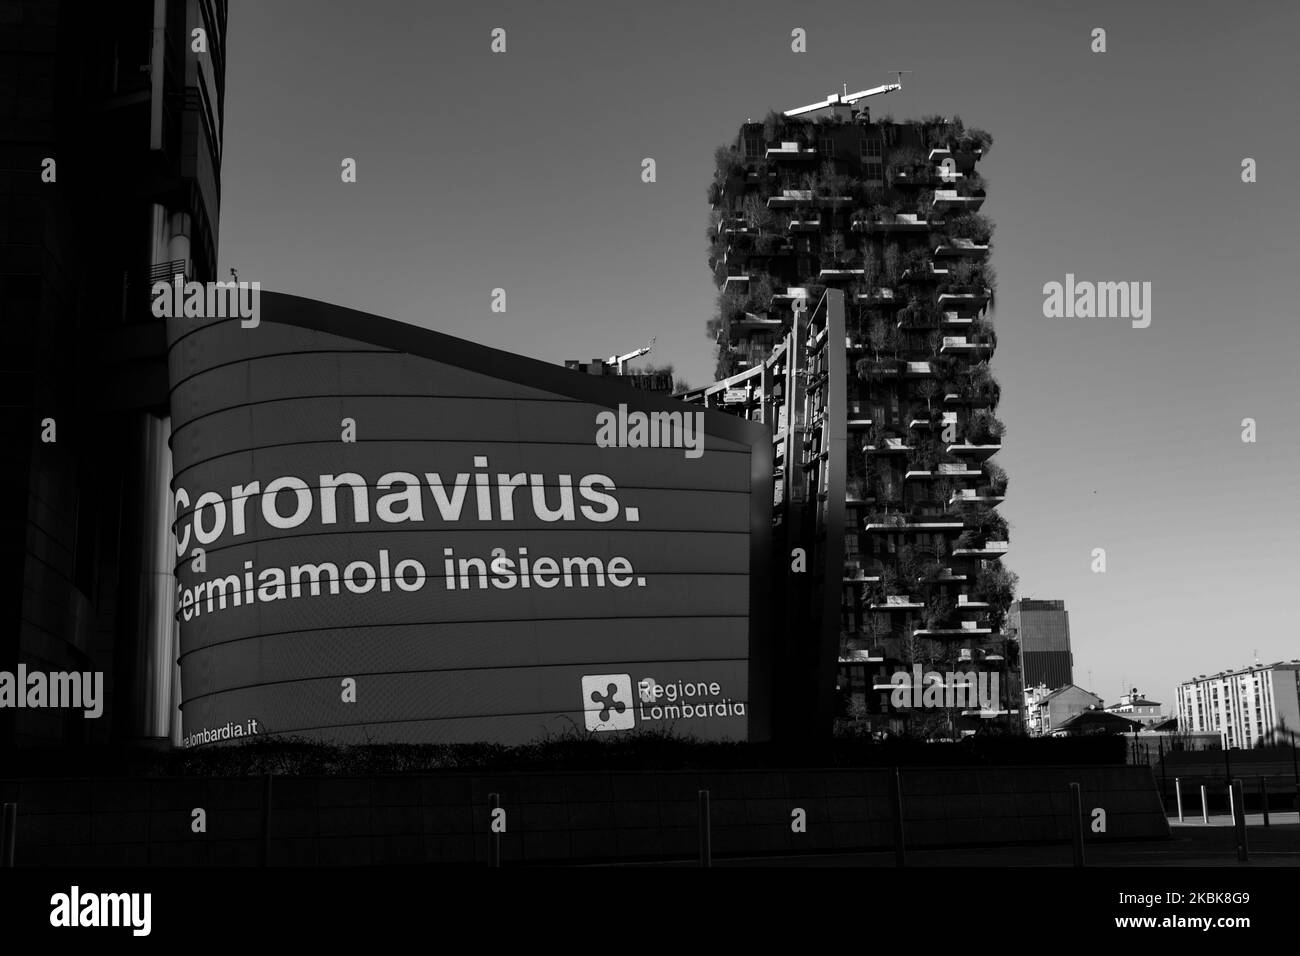 (EDITOR'S NOTE: This image has been converted to black and white.) General view of Gae Aulenti Square and Bosco Verticale (vertical forest), March 19, 2020 in Milan, Italy. The Italian Government has strengthened up its quarantine rules, shutting all commercial activities except for pharmacies, food shops, gas stations, tobacco stores and news kiosks in a bid to stop the spread of the novel coronavirus. (Photo by Mairo Cinquetti/NurPhoto) Stock Photo